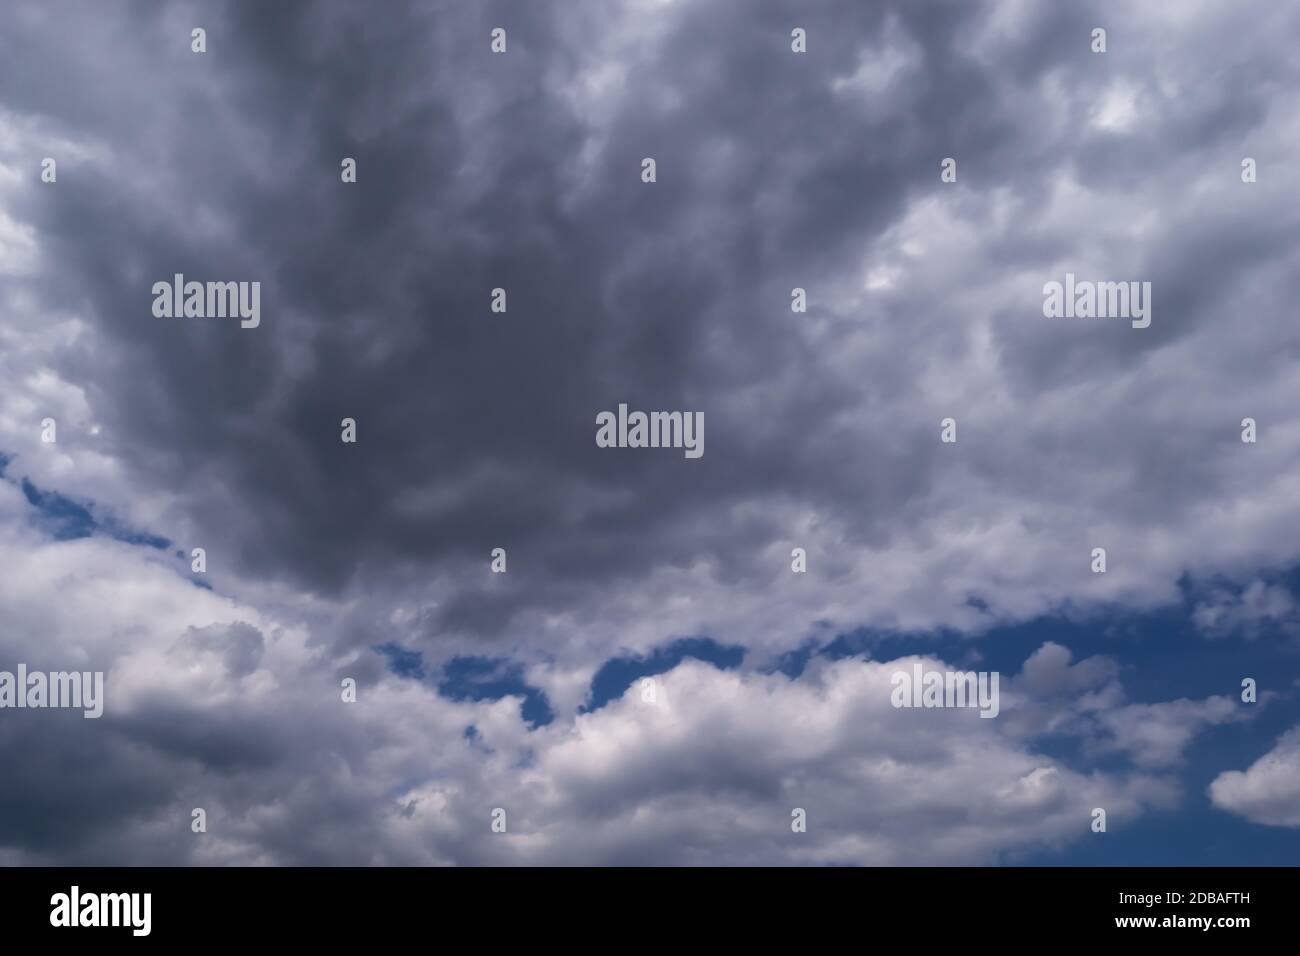 Dramatic Sky With Clouds, Background Stock Photo